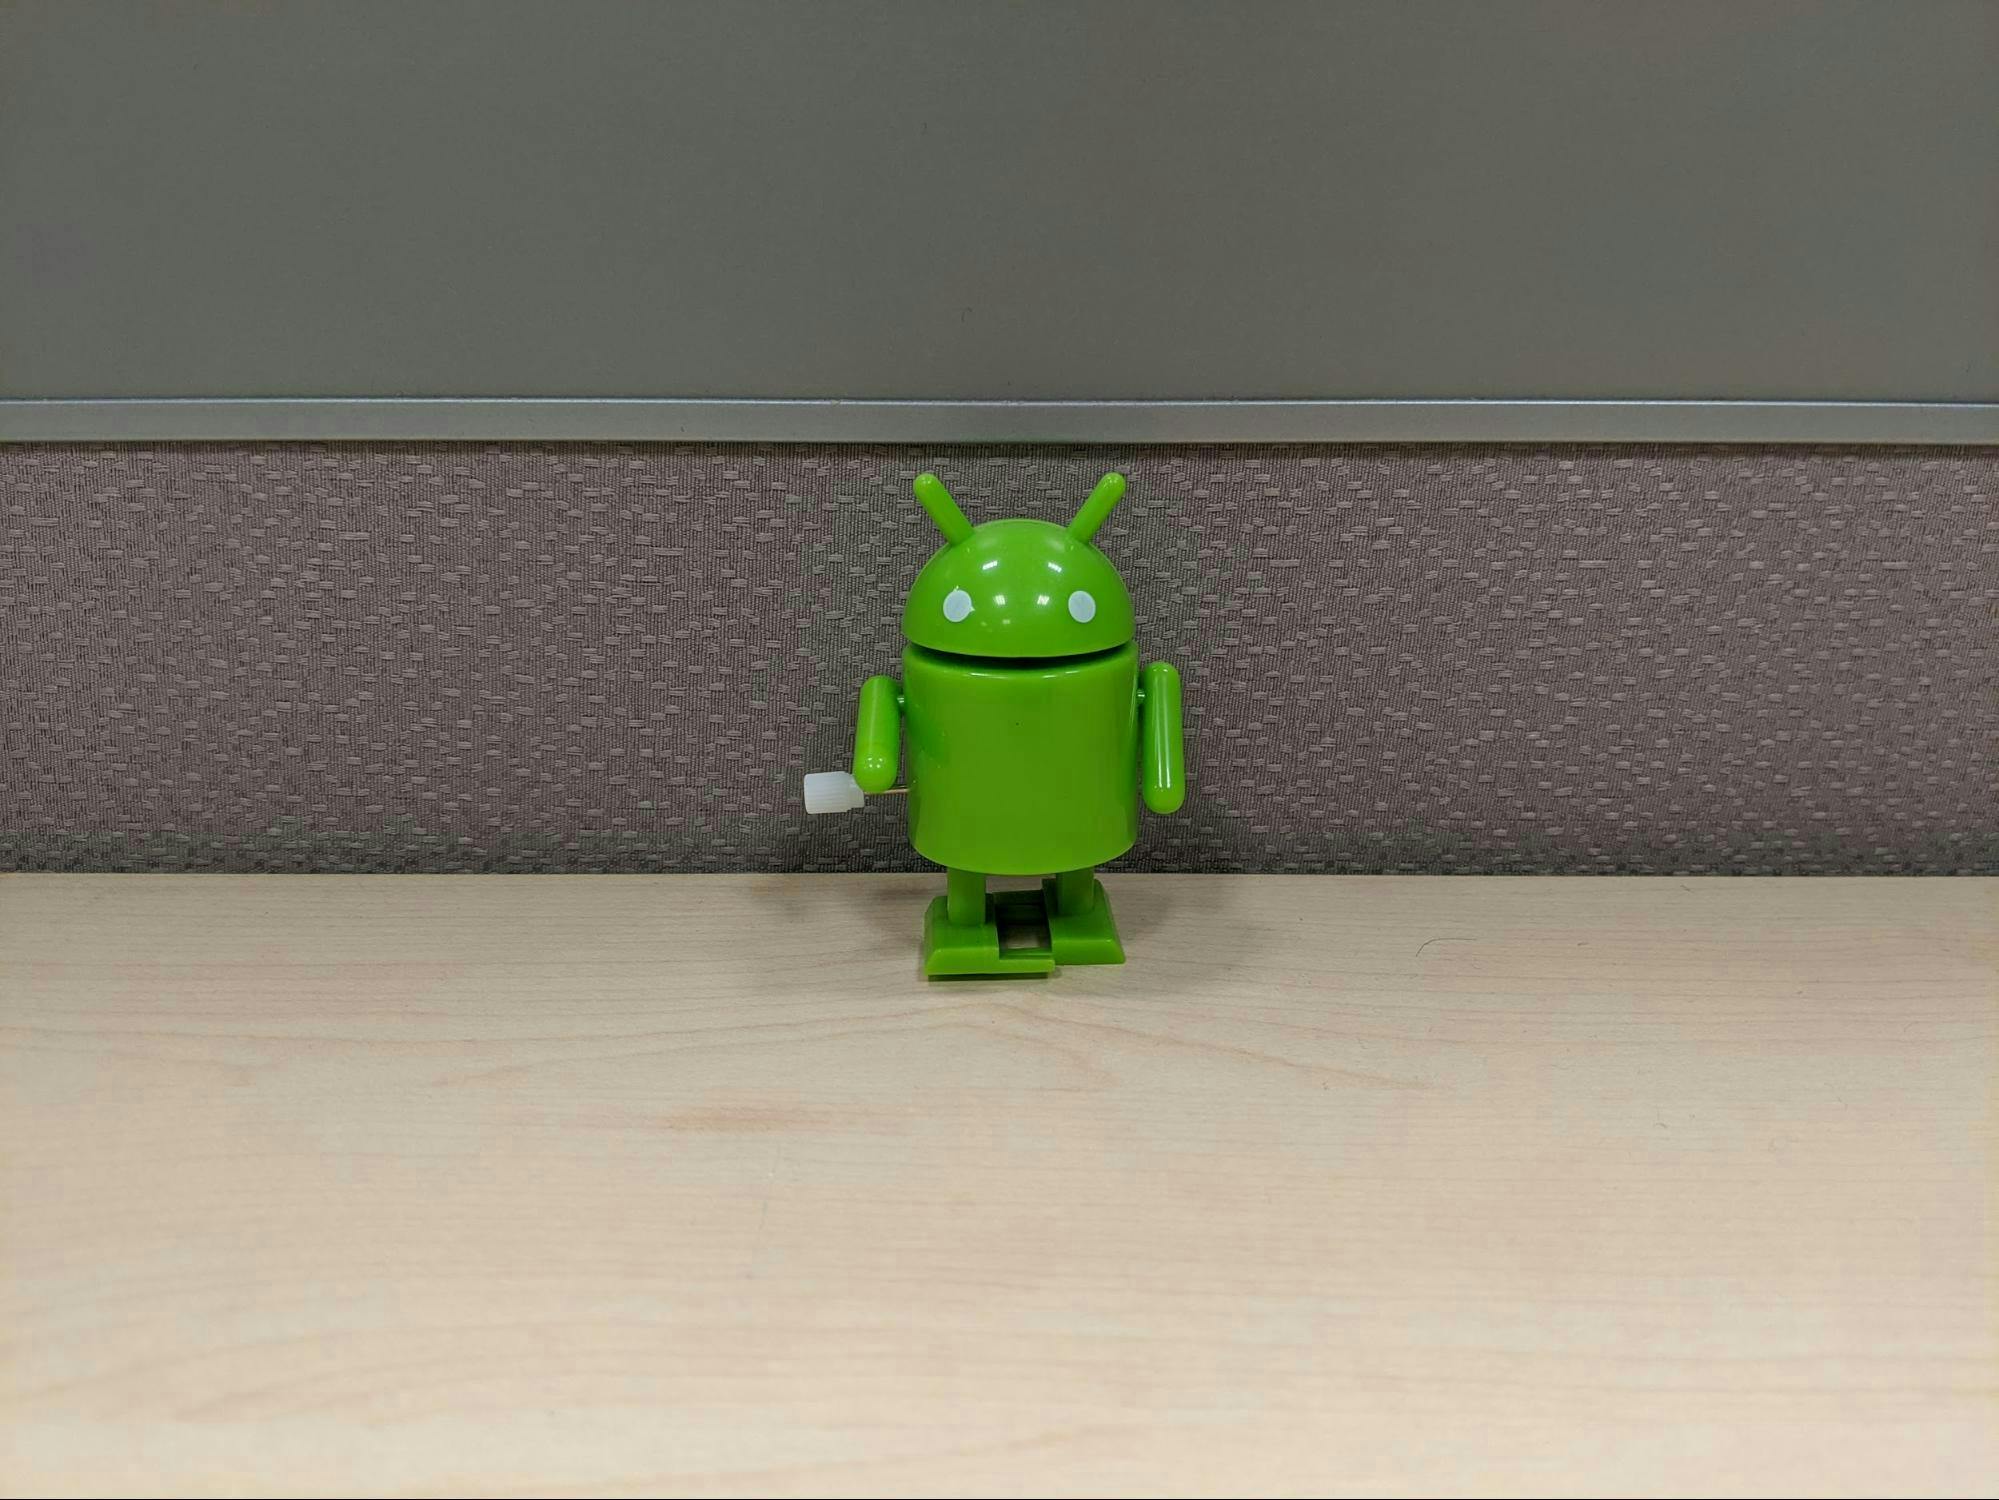 A scene with a cute Android figurine (bugdroid)